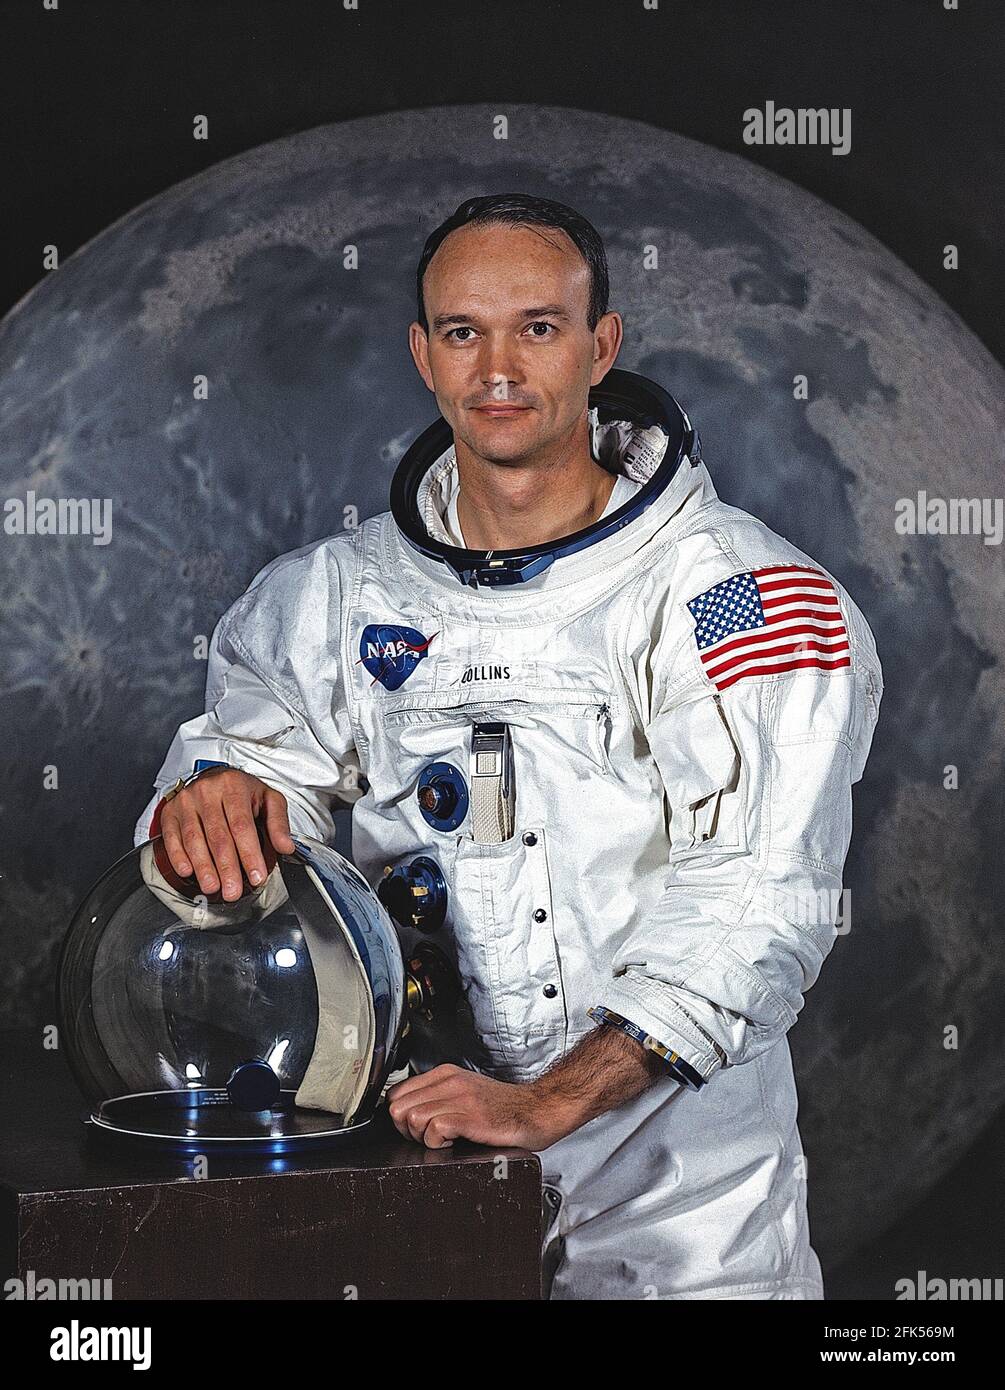 Houston, TX - File photo -- Portrait of Michael Collins, Command Module (CM) Pilot of Apollo 11 Lunar Landing Mission taken on May 1, 1969. Apollo 11 was Collins' second and final trip to space. He previously piloted the Gemini 10 mission on July 18, 1966. On that mission Collins completed two periods of extravehicular activity (EVA). Apollo 11 launched on July 16, 1969. Collins remained in Lunar orbit aboard the CM 'Columbia', while his crew mates Neil Armstrong and Buzz Aldrin landed on the Moon.Credit: NASA via CNP /MediaPunch Stock Photo